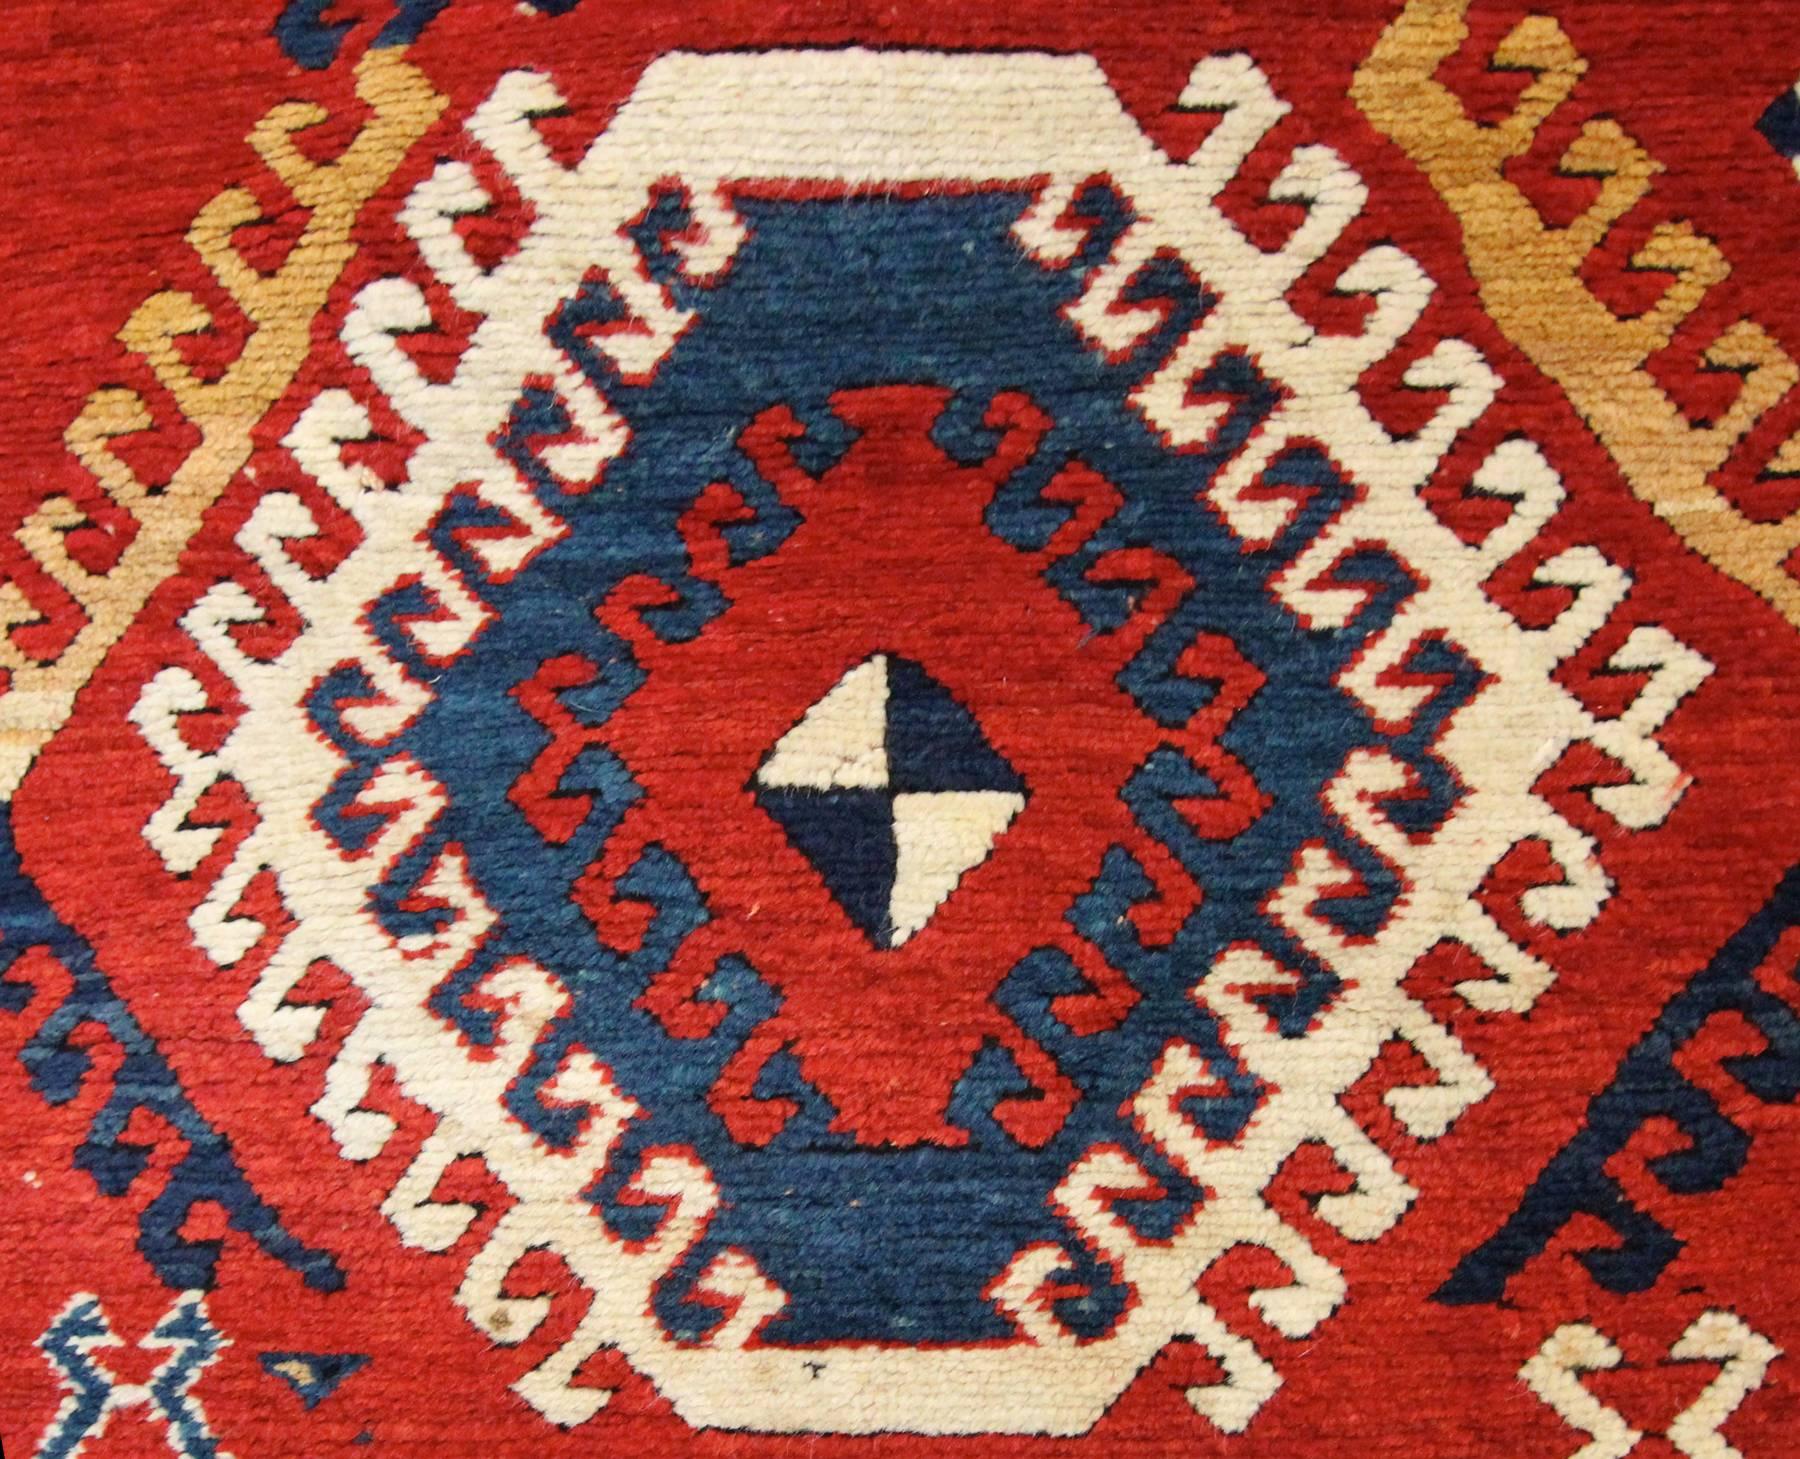 A beautiful full pile antique Borjalou Kazak rug woven in the last 1/4 of the 19th century in remarkable original condition. These type of rugs from the Caucasus always have a striking latch-hook zig-zag border, along with the same repeating motif